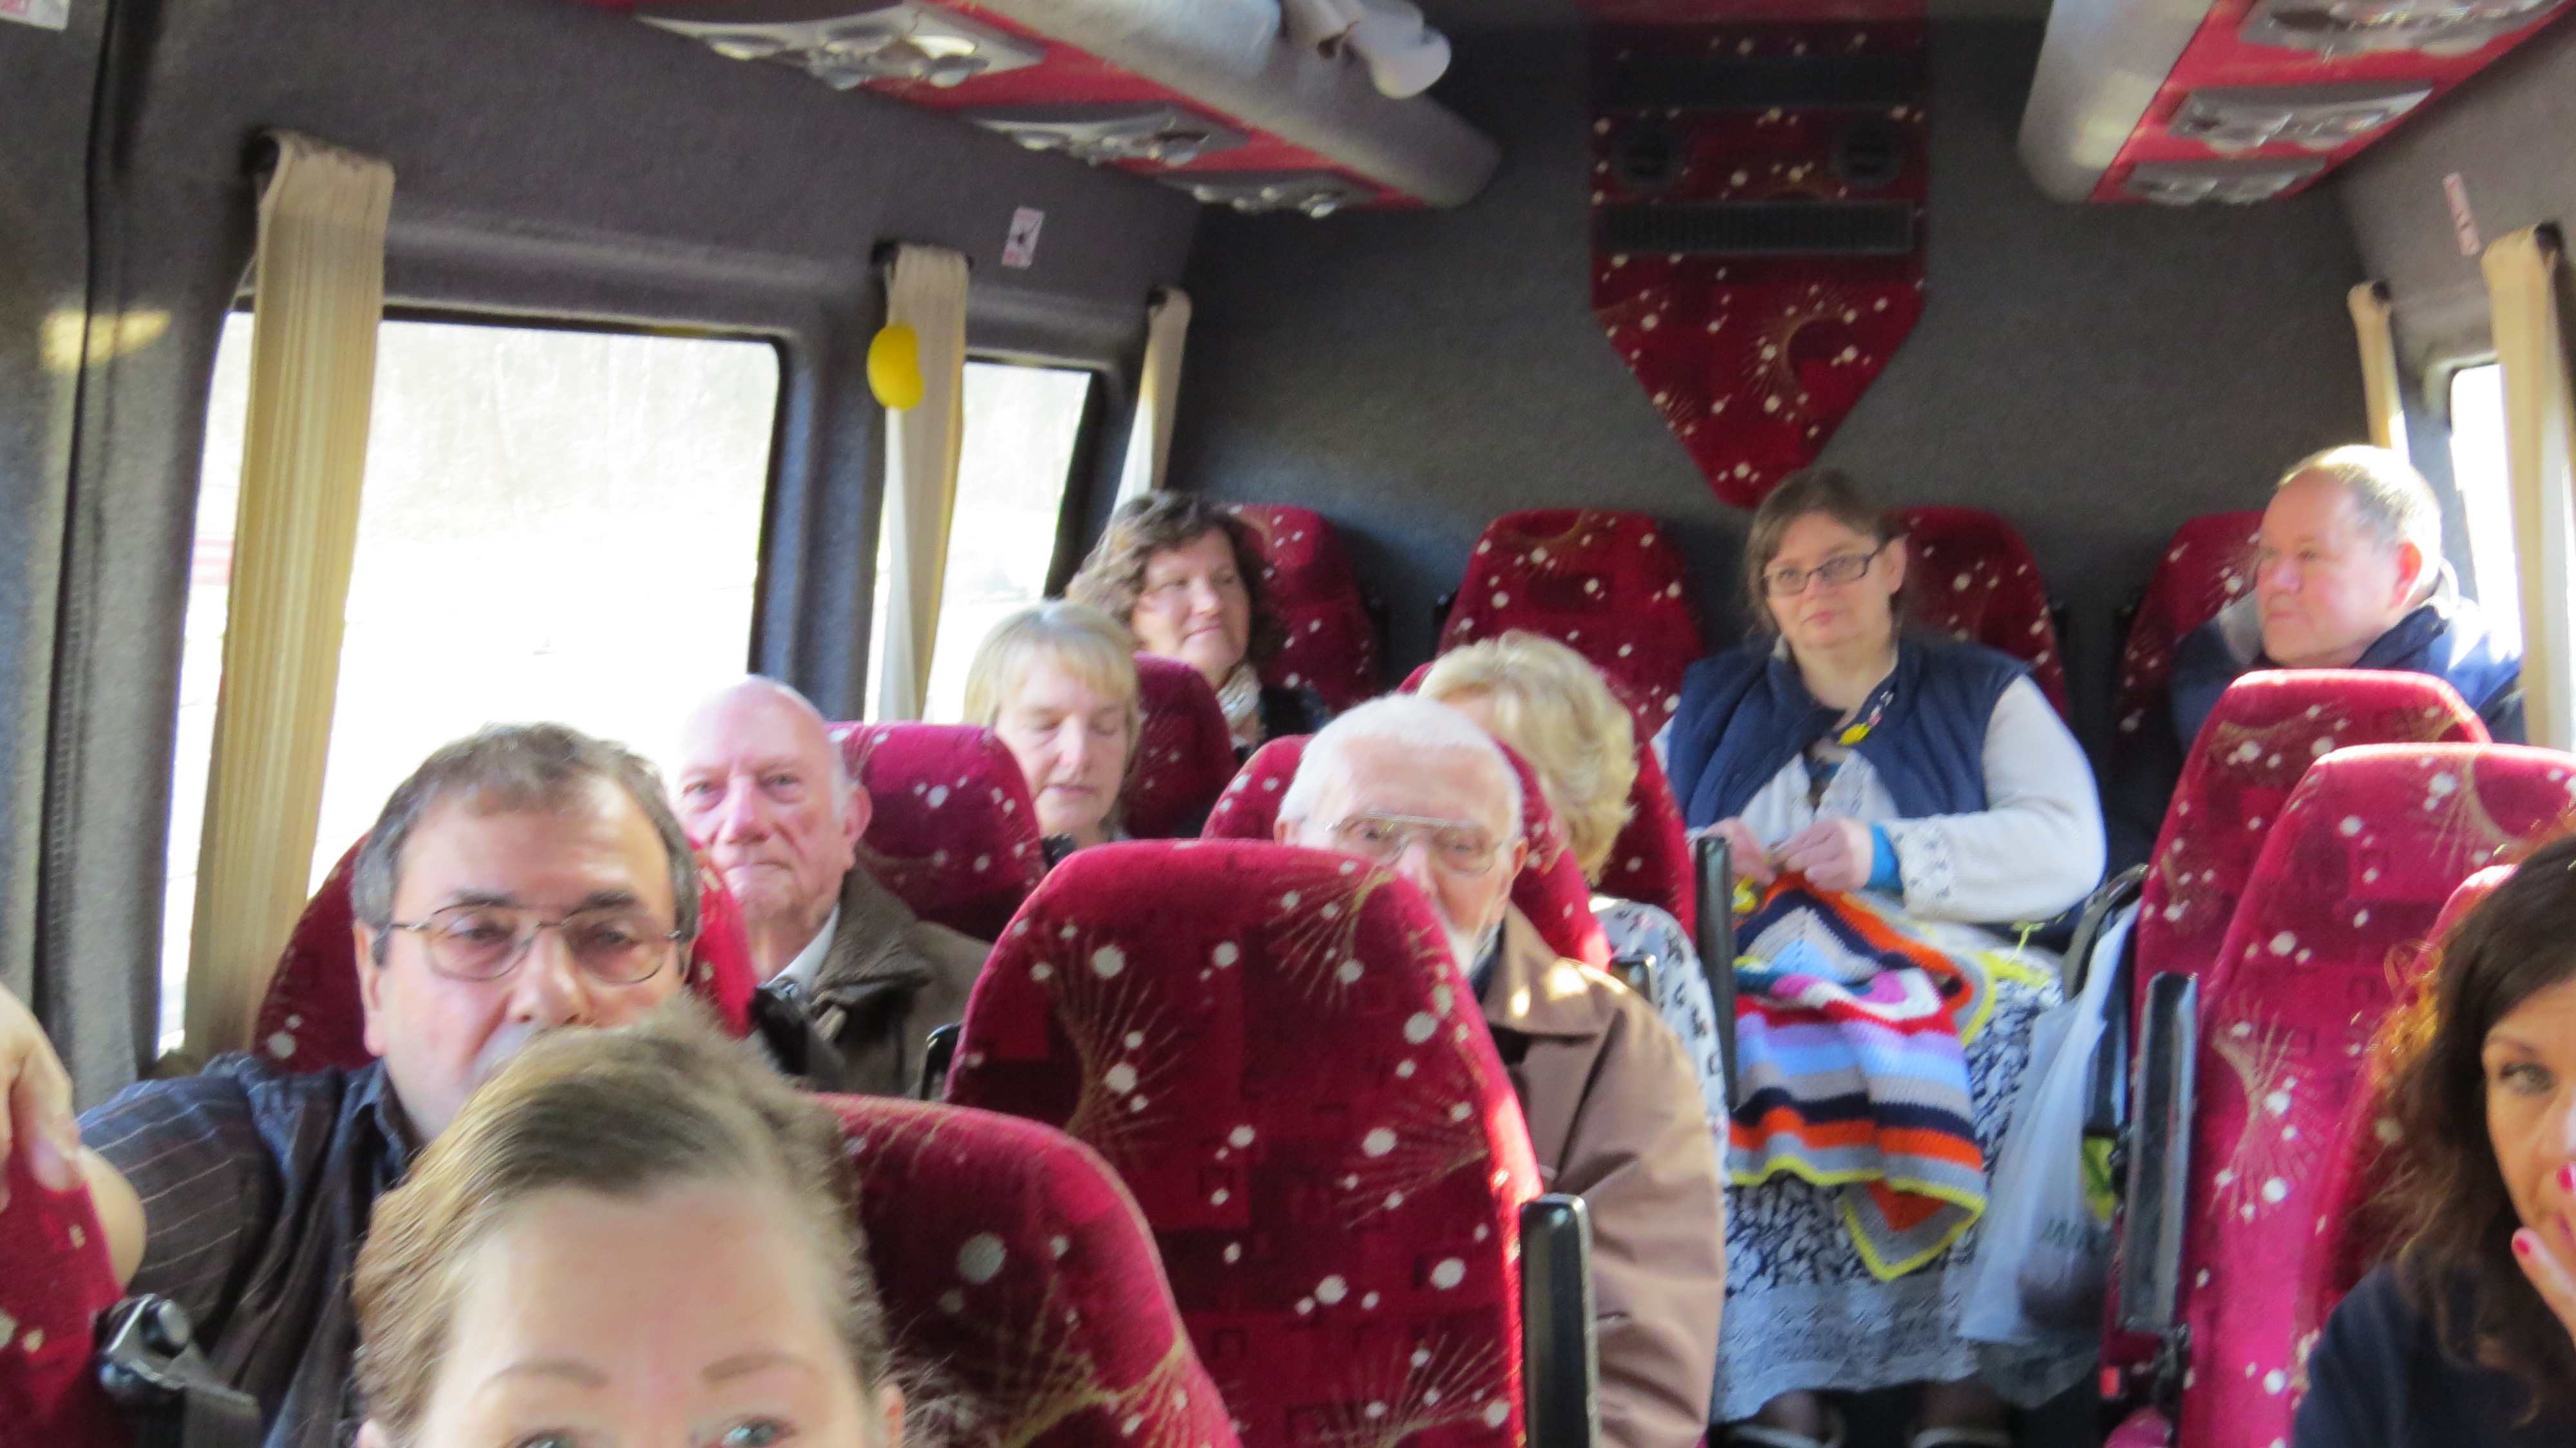 the group on the coach